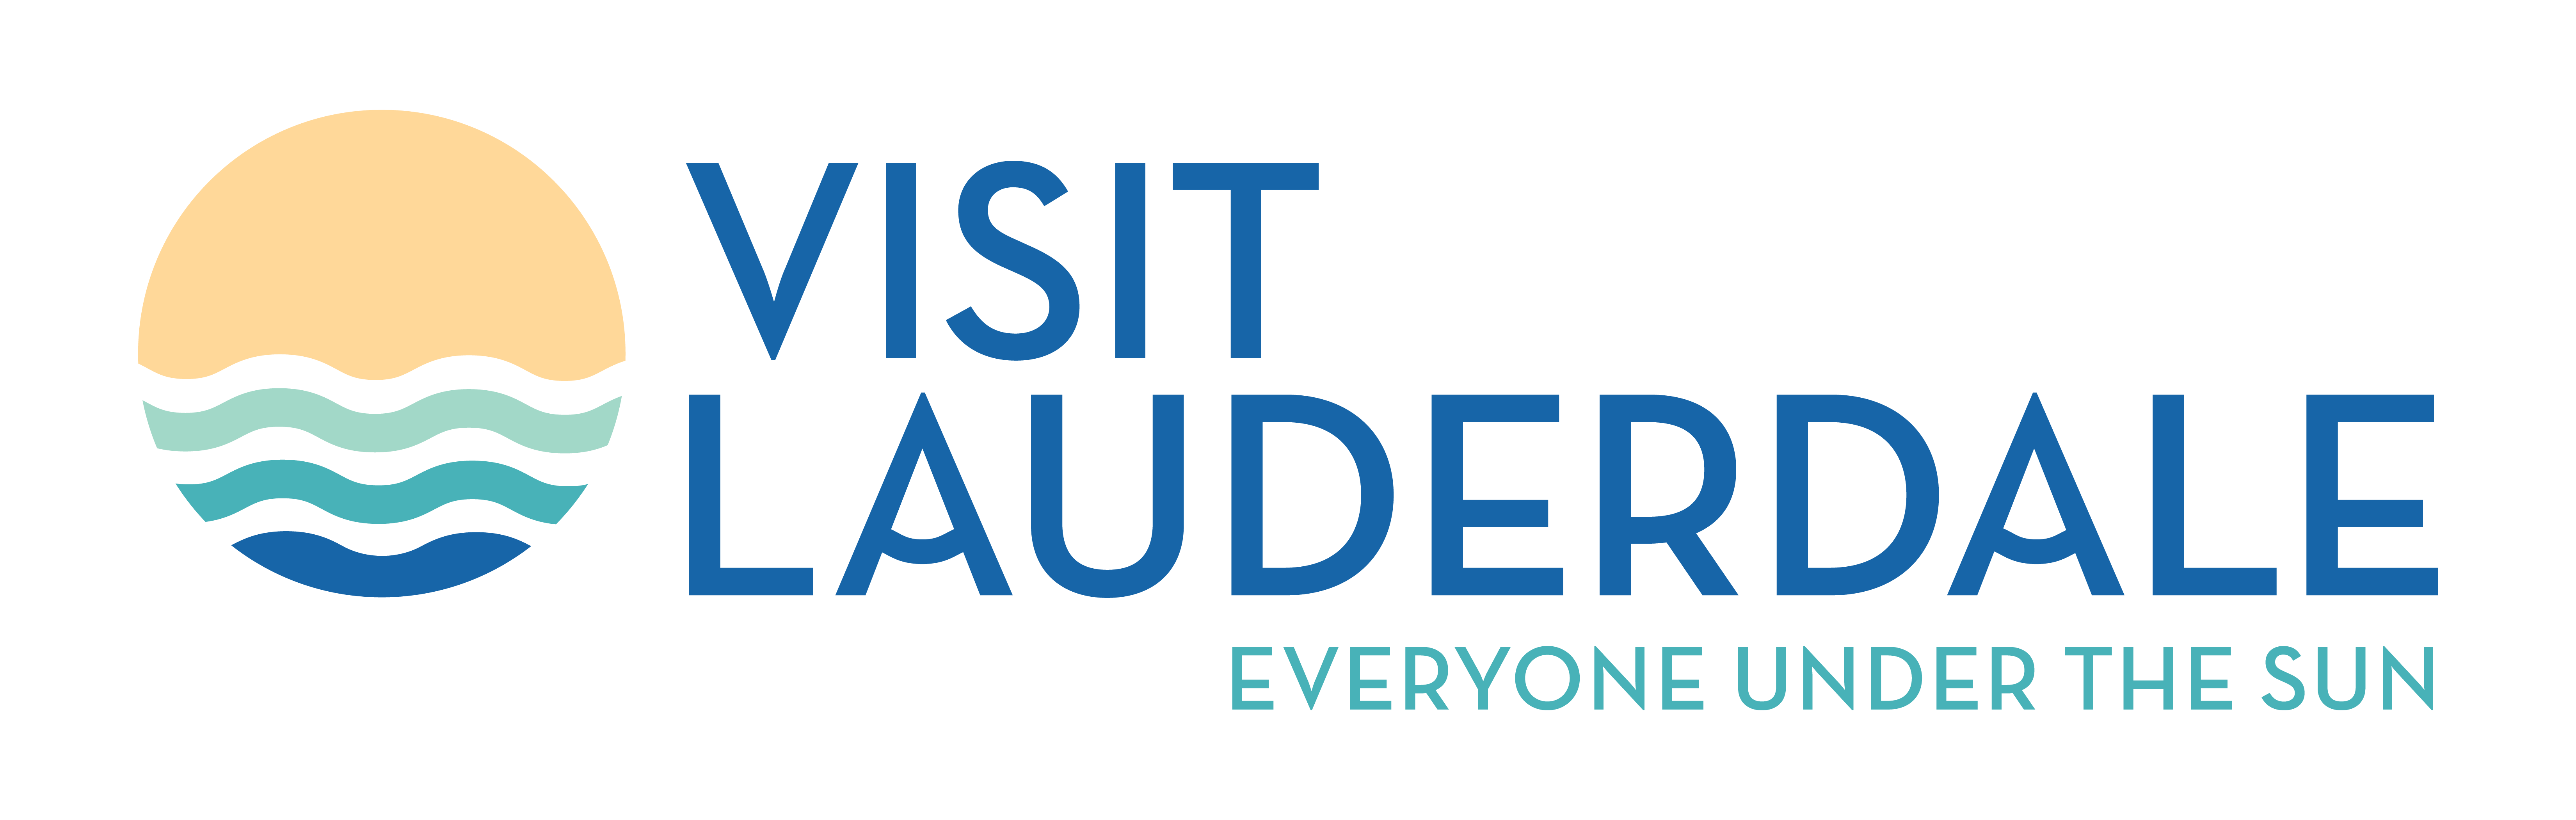 The logo of visit lauderdale with transparent background